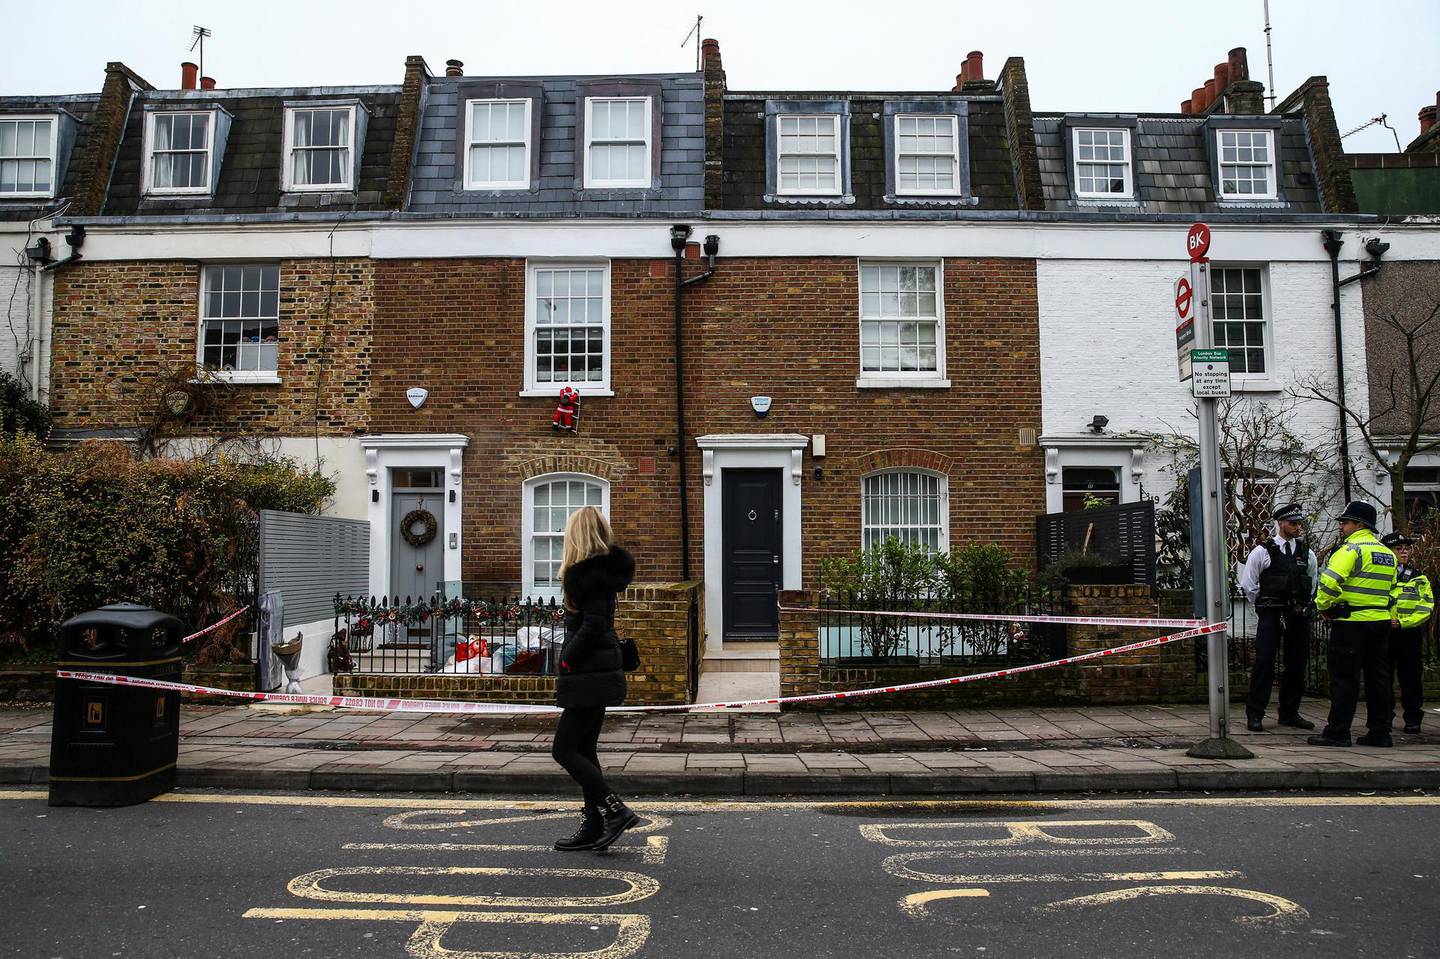 LONDON, ENGLAND - DECEMBER 27: Police stand outside the crime scene where Flamur Beqiri, 36, a father of one, was murdered on December 27, 2019 in south-west London, England. Beqiri was shot dead outside his home on Battersea Church Road on Christmas Eve. The Swedish national is the brother of former Real Housewives of Cheshire star Misse Beqiri. (Photo by Hollie Adams/Getty Images)